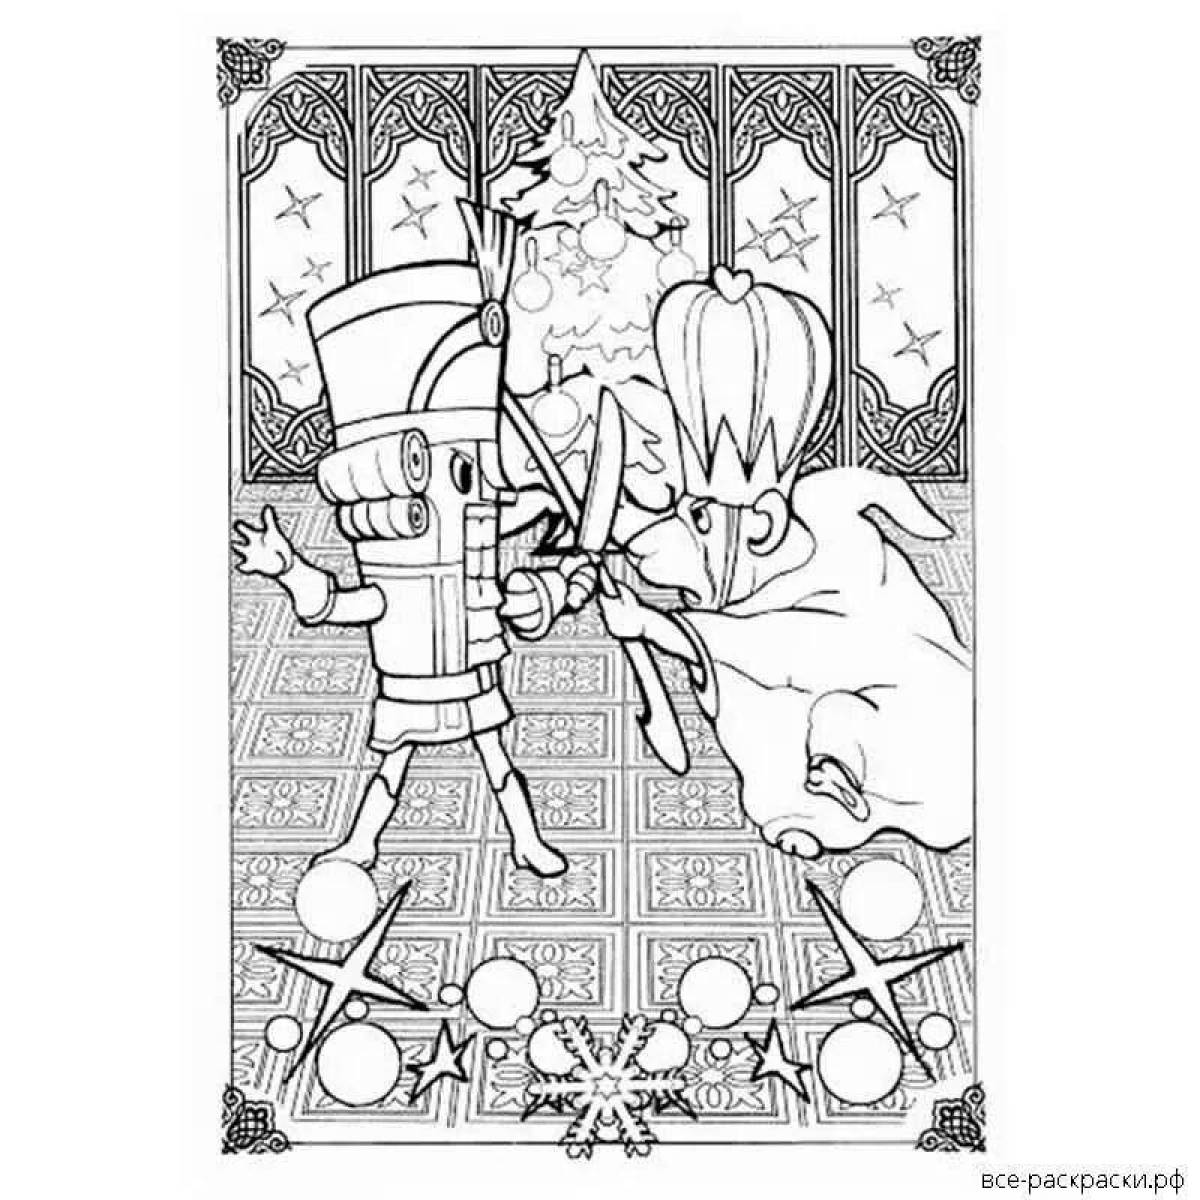 Exquisite nutcracker and mouse king coloring book